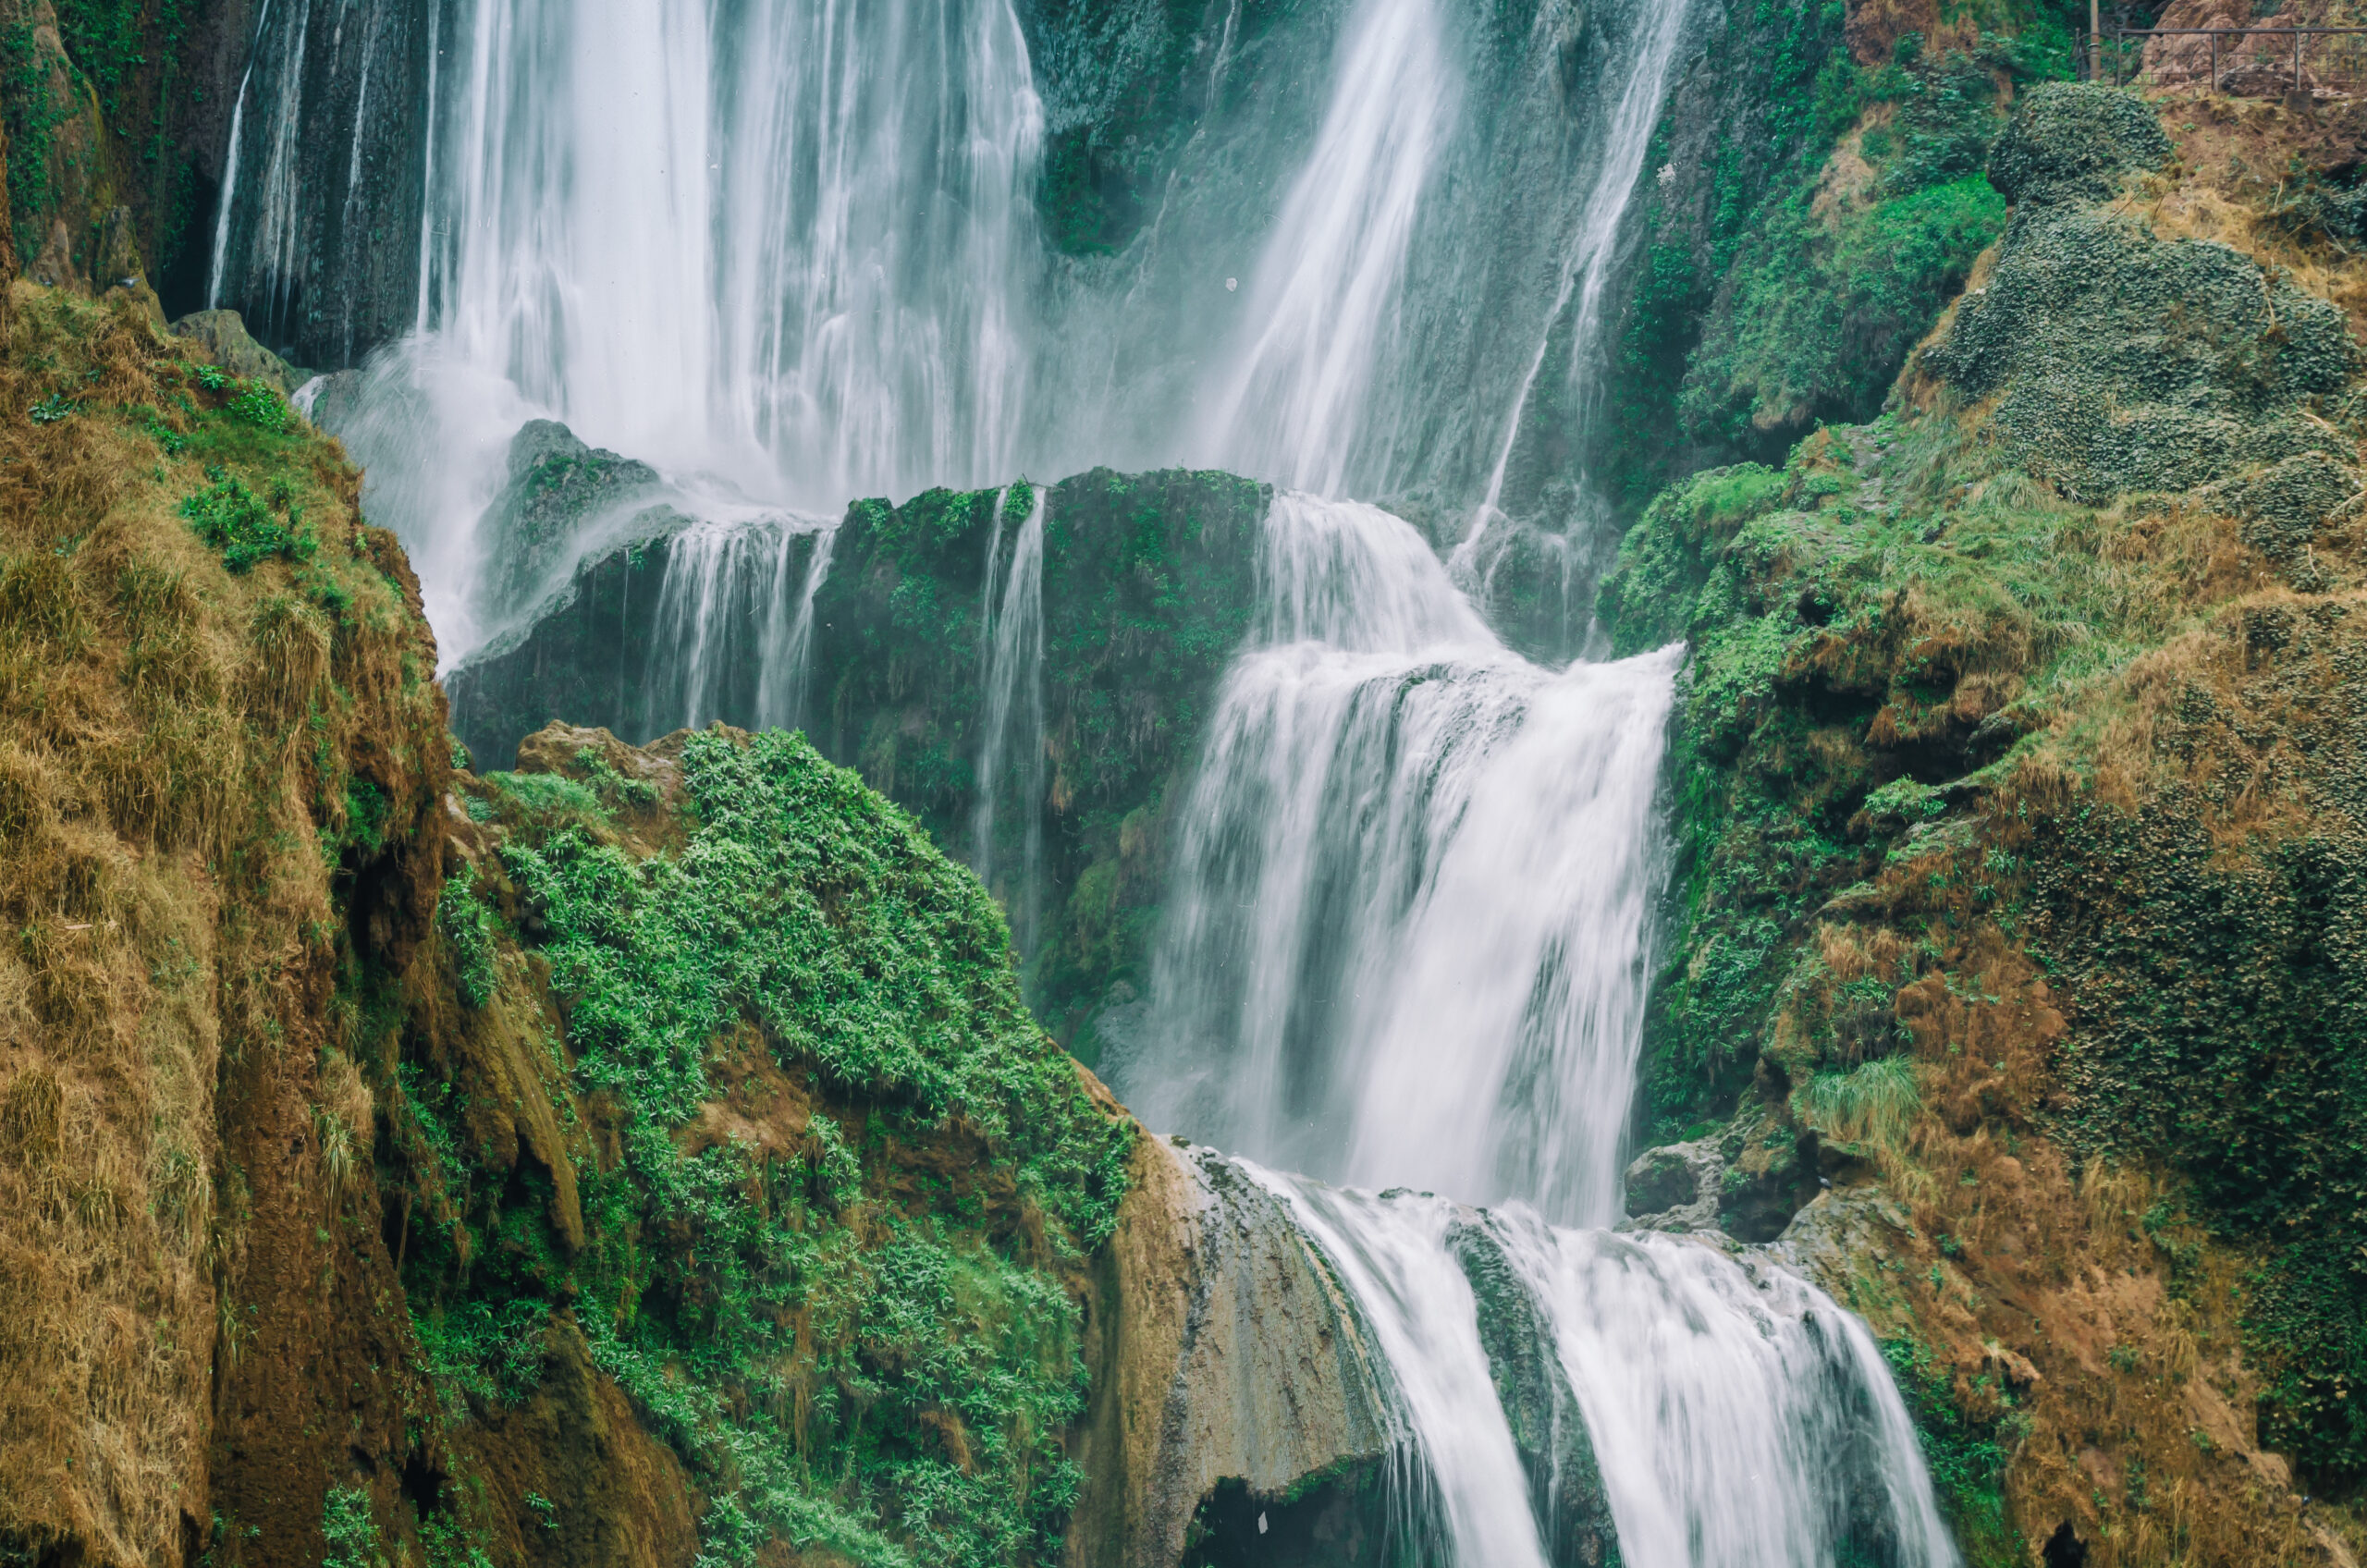 production-services-and-filming-in-marocco-waterfall-with-soft-flowing-water-large-colored-rocks